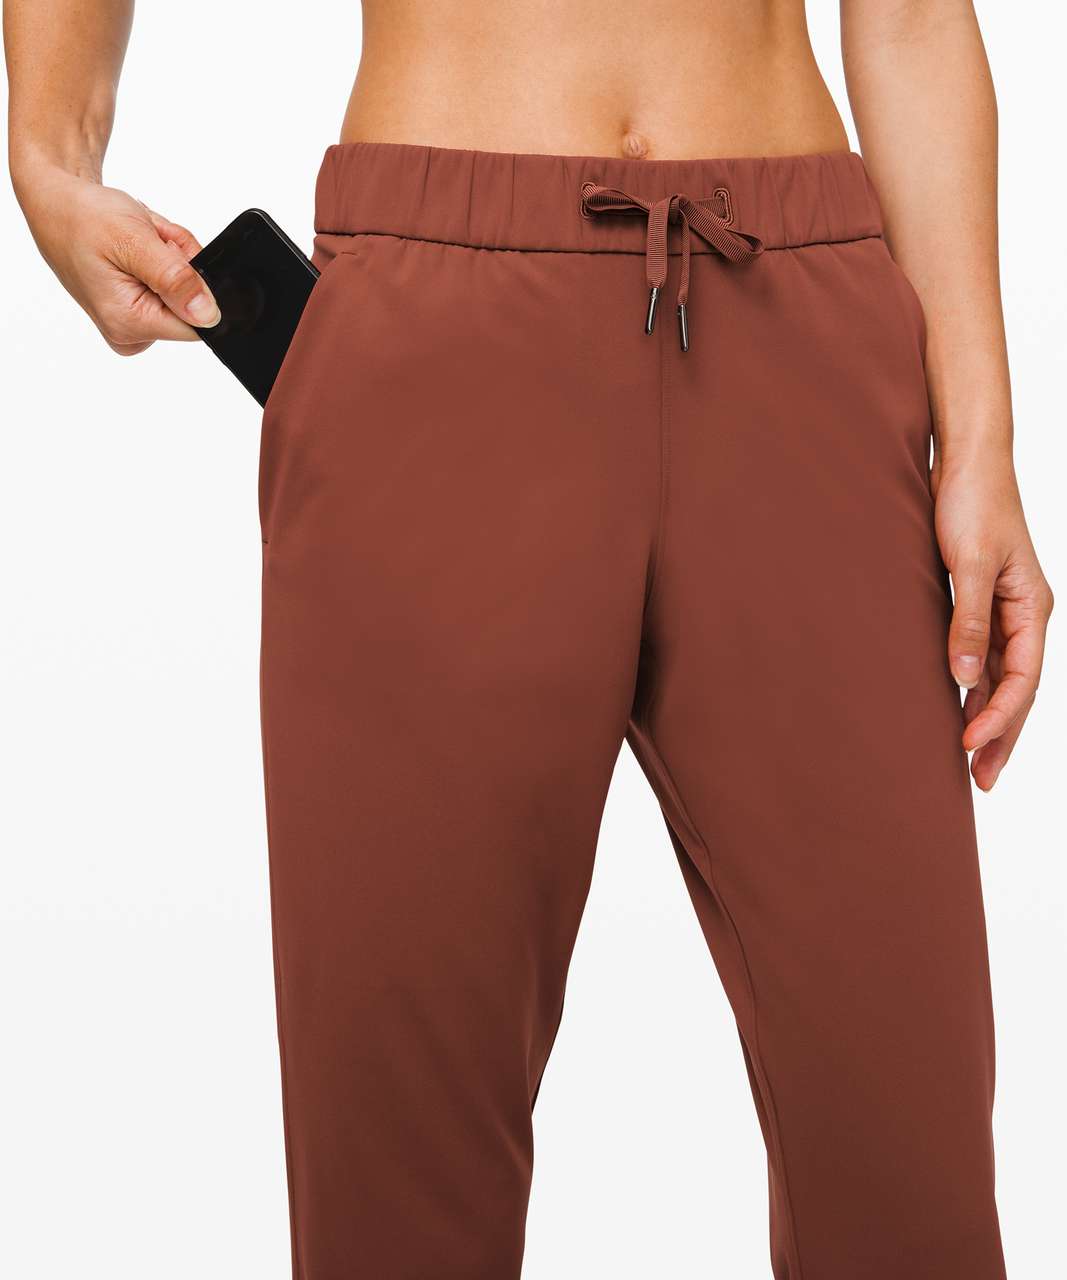 Lululemon On the Fly 7/8 Pant - Rustic Clay